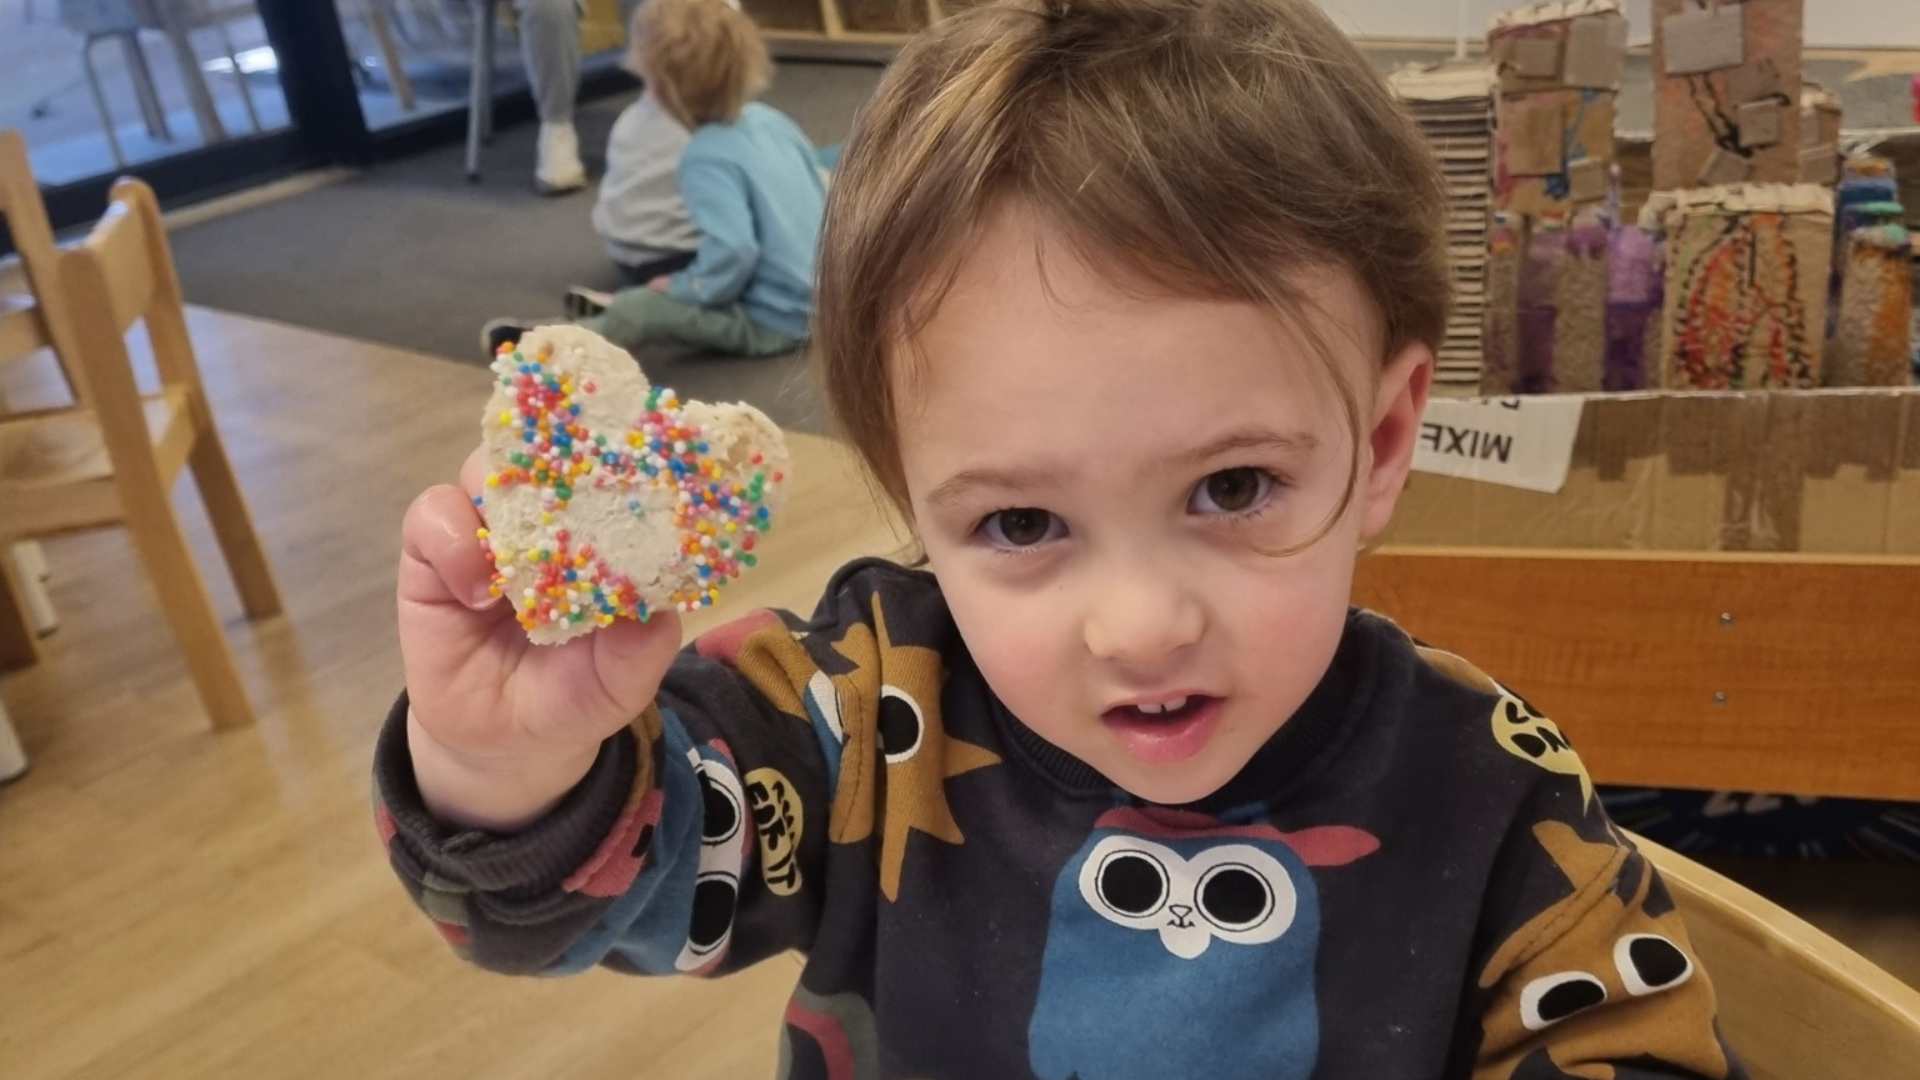 A little learner in our ELC is looking at the camera and holding up heart-shaped bread with sprinkles on it. They are celebrating Tu b'Av